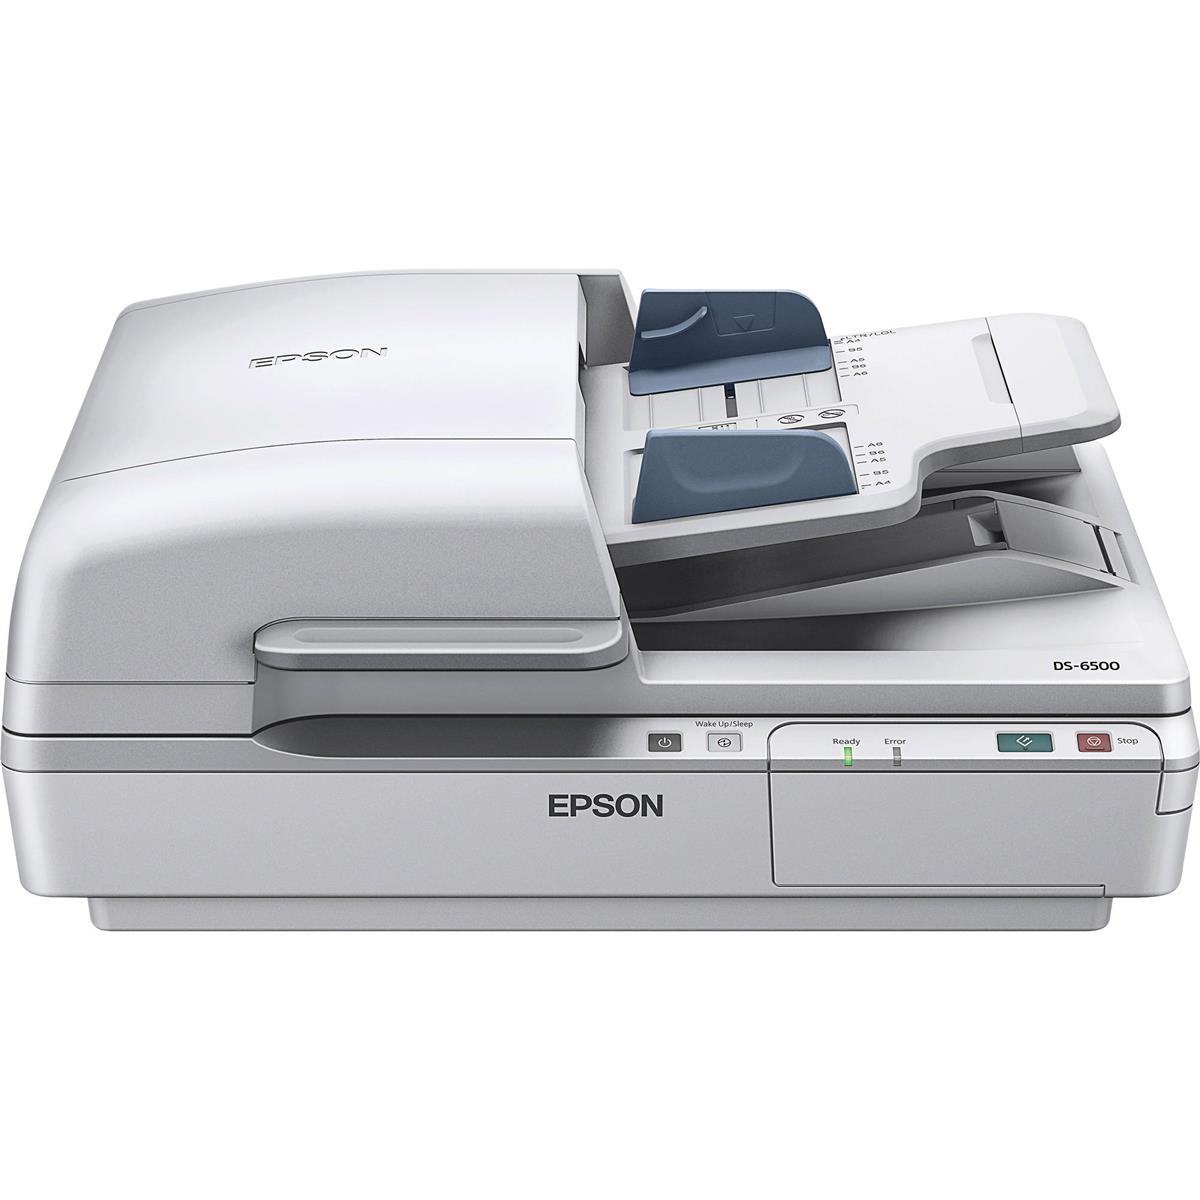 Image of Epson Workforce DS-6500 Document Scanner